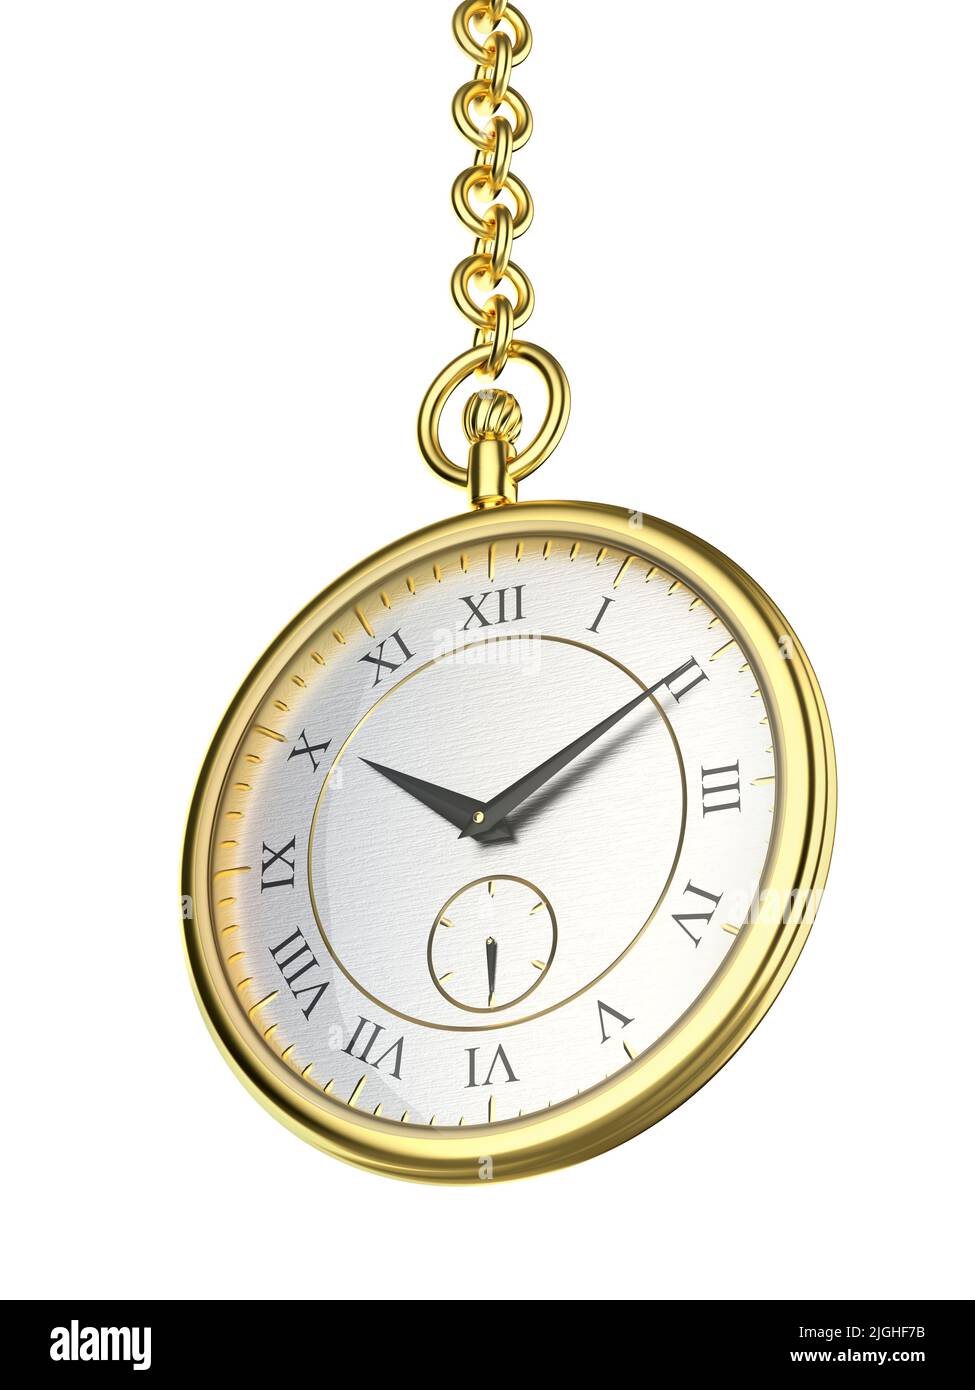 Shiny gold pocket watch with chain, isolated on white background Stock Photo